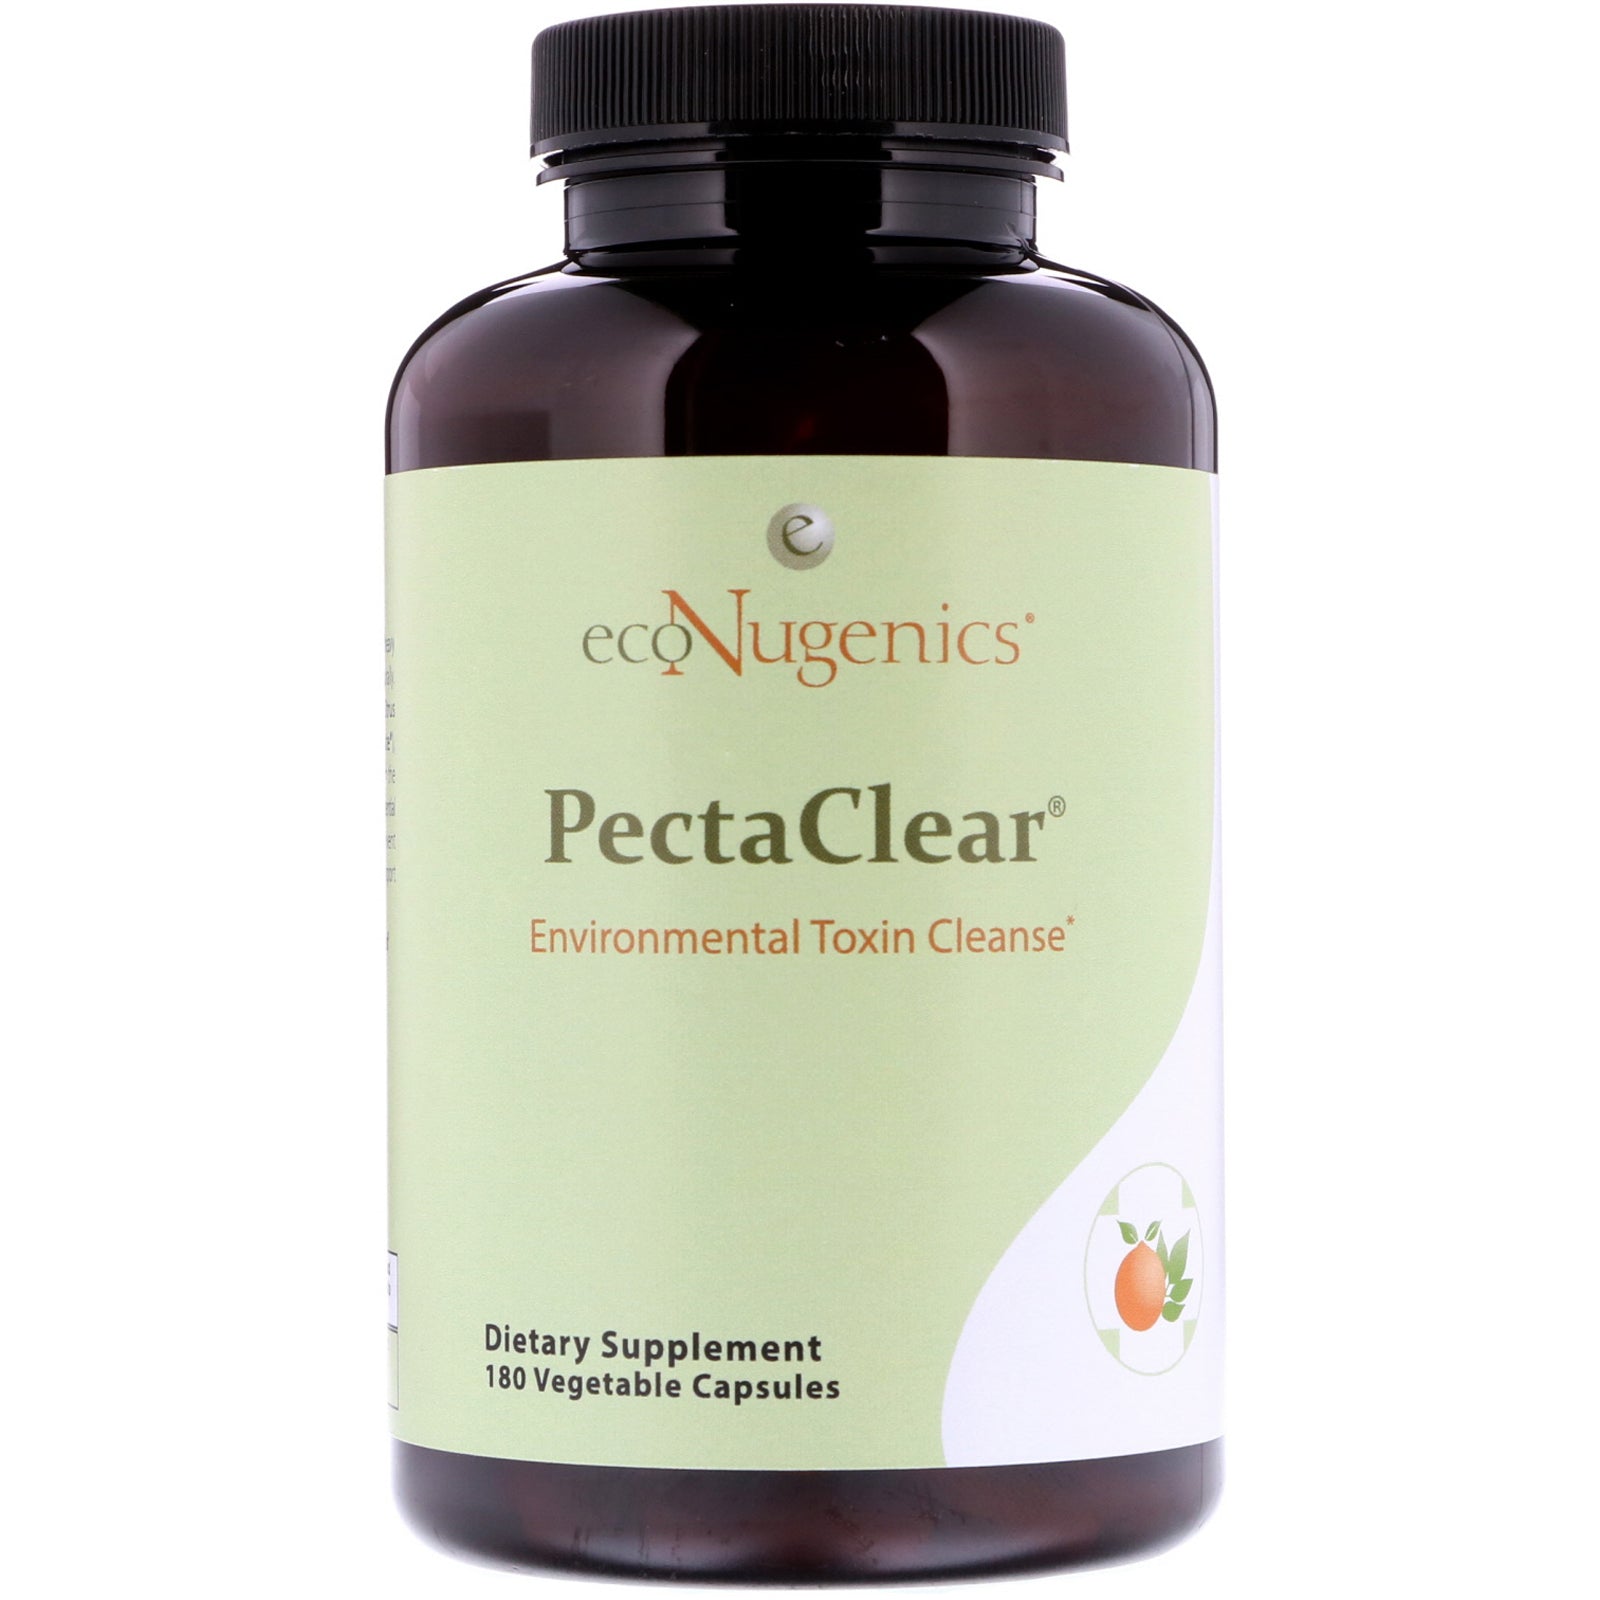 Econugenics, PectaClear, Environmental Toxin Cleanse Vegetable Capsules